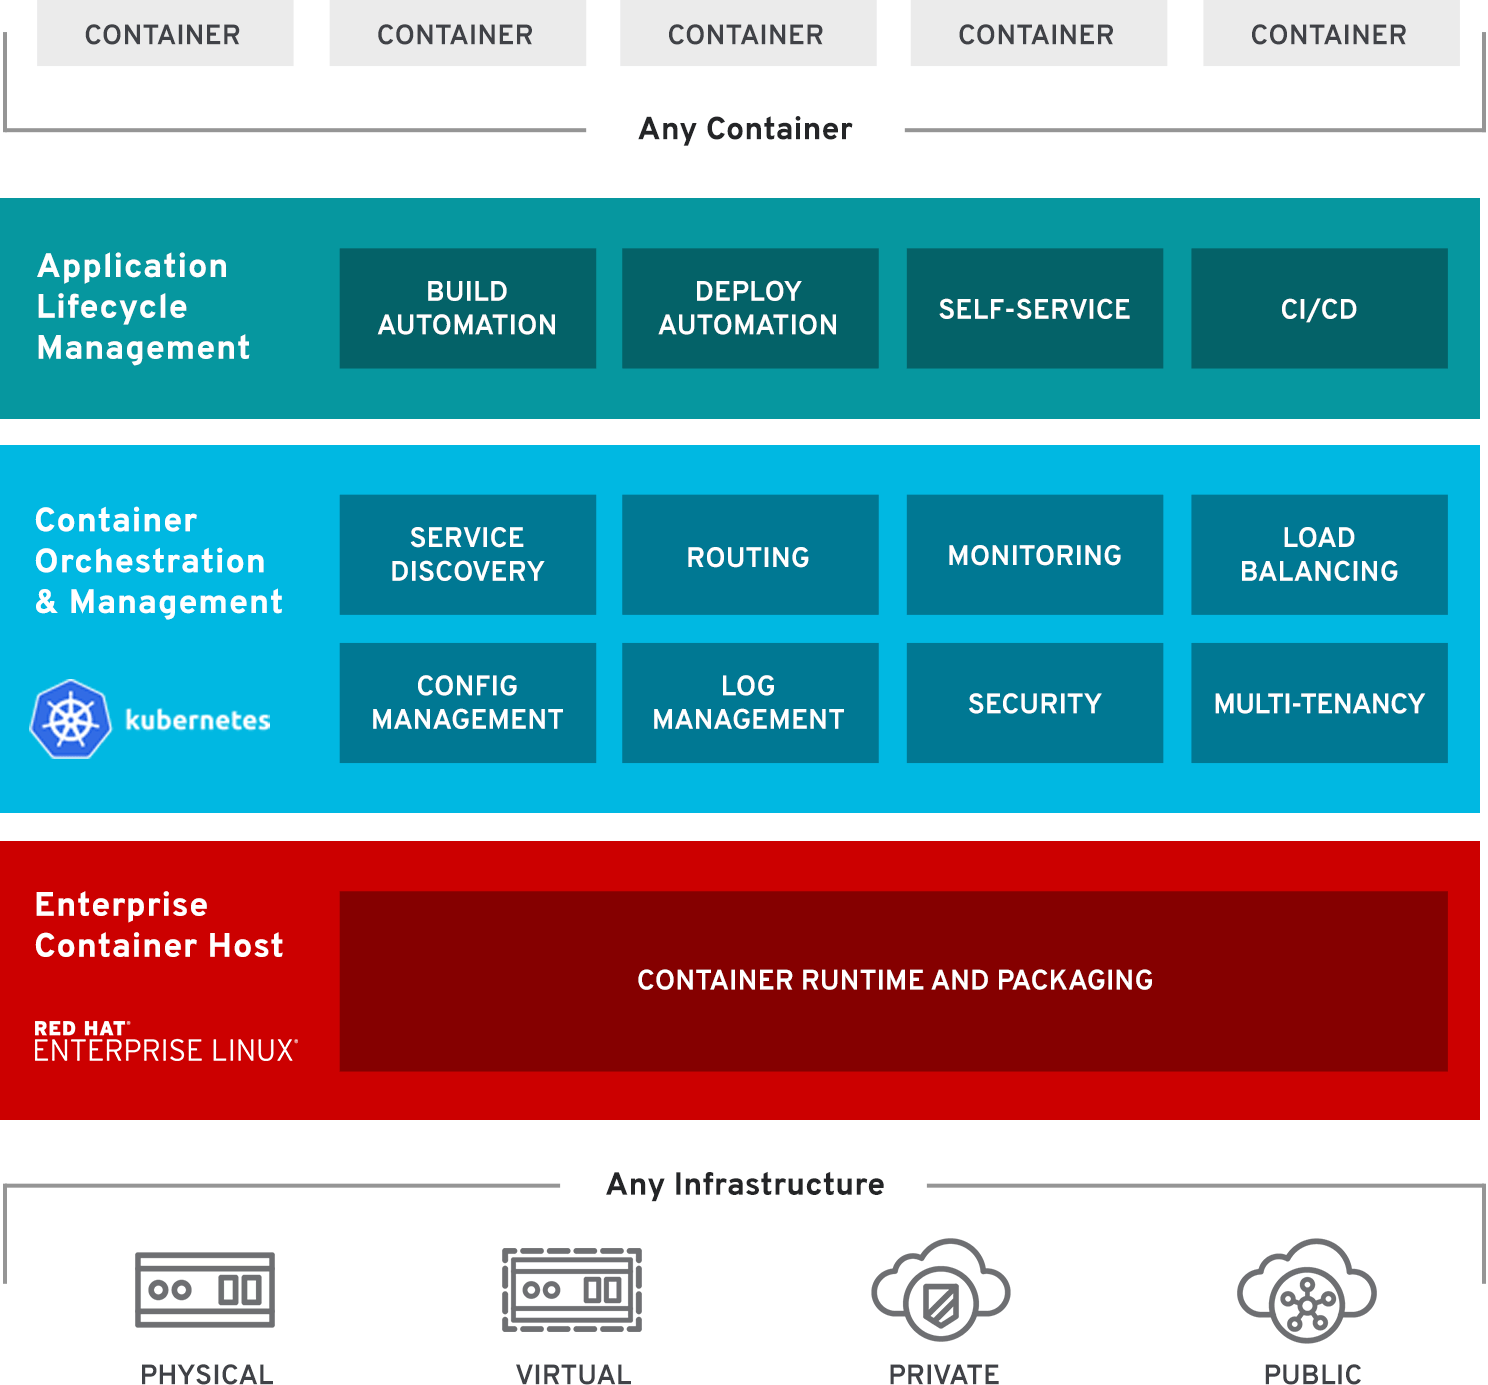 tsunamien Lade være med milits Red hat Openshift Deploy Image Example - Create V2Ray Server -  Cybersecurity Memo